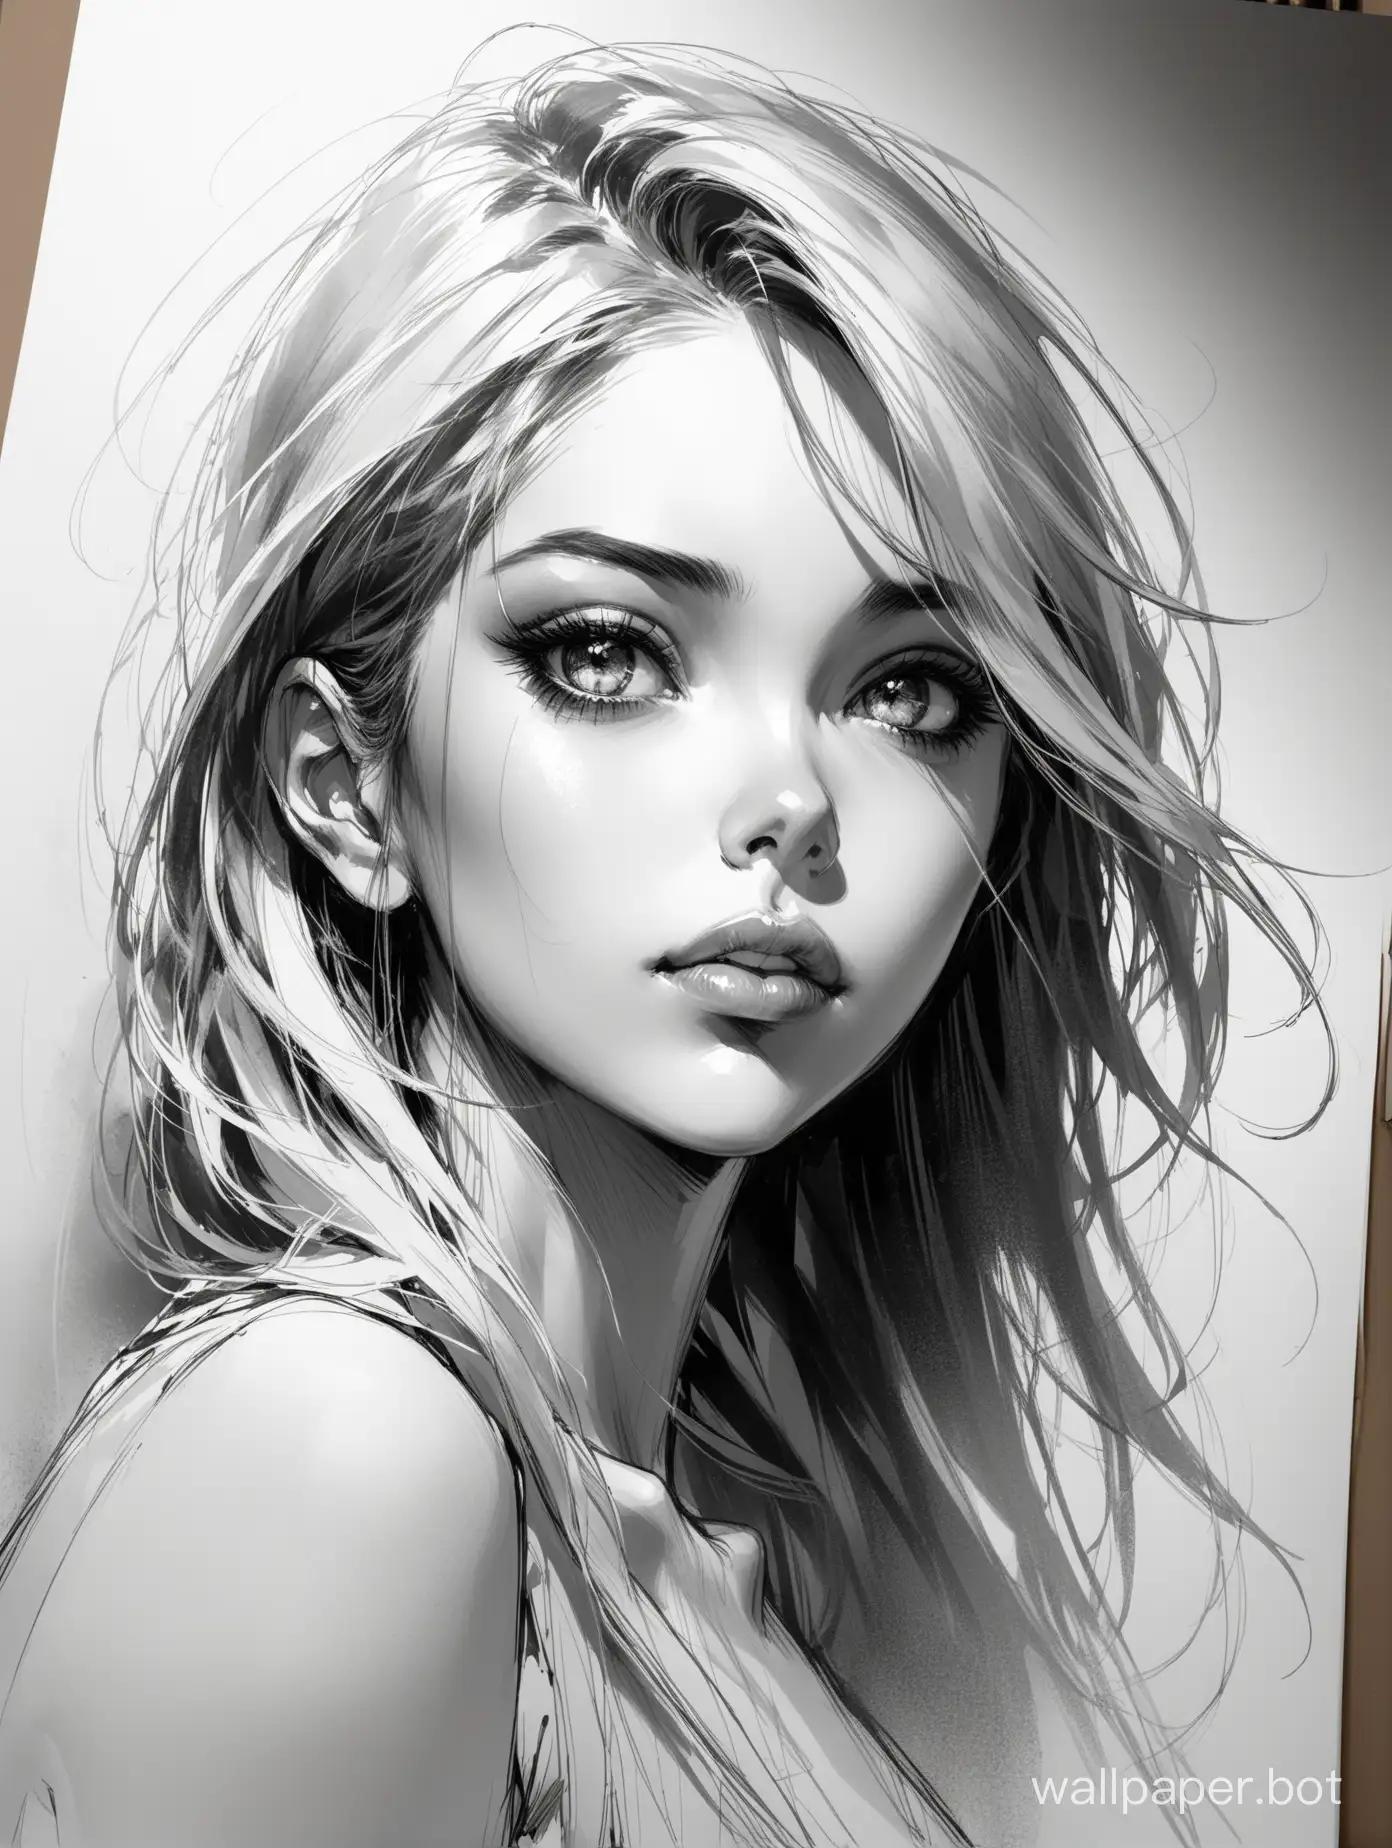 image of a girl in the style of Russ Mills, Mikhail and Inessa Garmash, large expressive eyes, full lips, clear skin, proportional face, graceful turn and bend of the neck, disheveled hair, bold expressive strokes to convey movement and emotion, realism and abstract elements, limited color palette, light pencil sketch, perfection, savage, concept art, Greg Rutkowski, smooth, sharp focus, correct anatomy, high detail